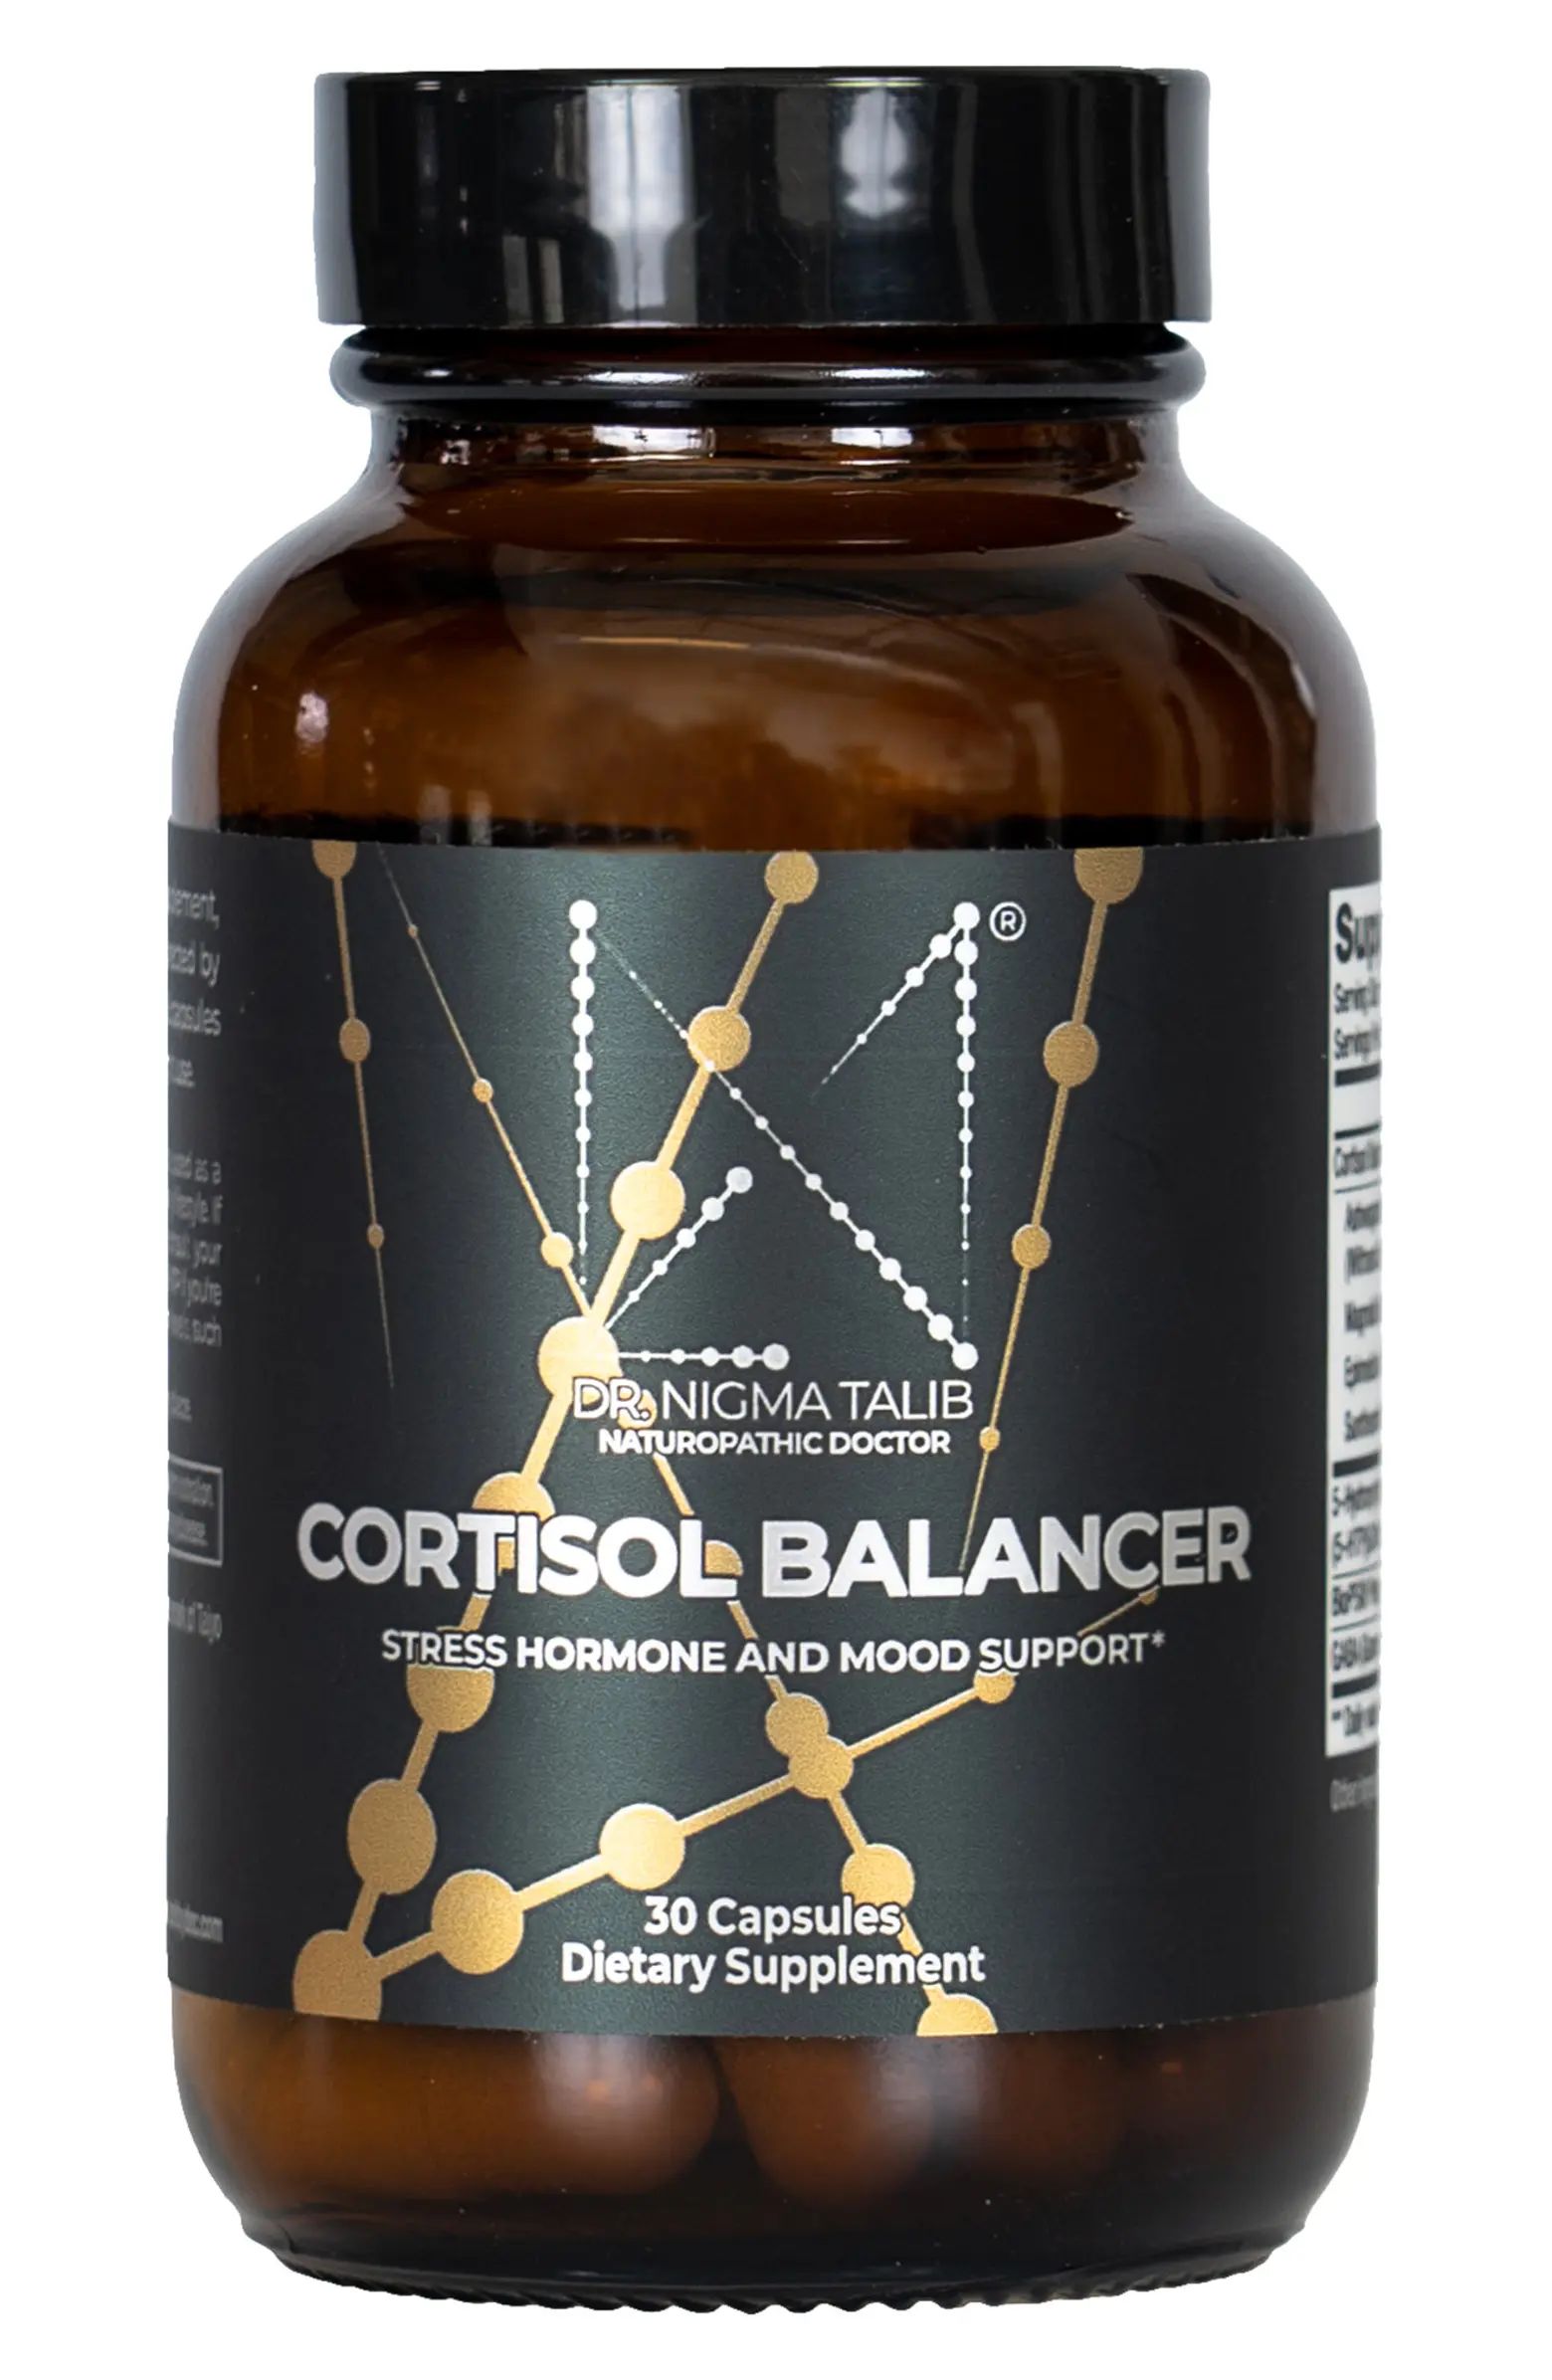 DR. NIGMA Cortisol Balancer Stress Hormone & Mood Support Dietary Supplement | Nordstrom | Nordstrom